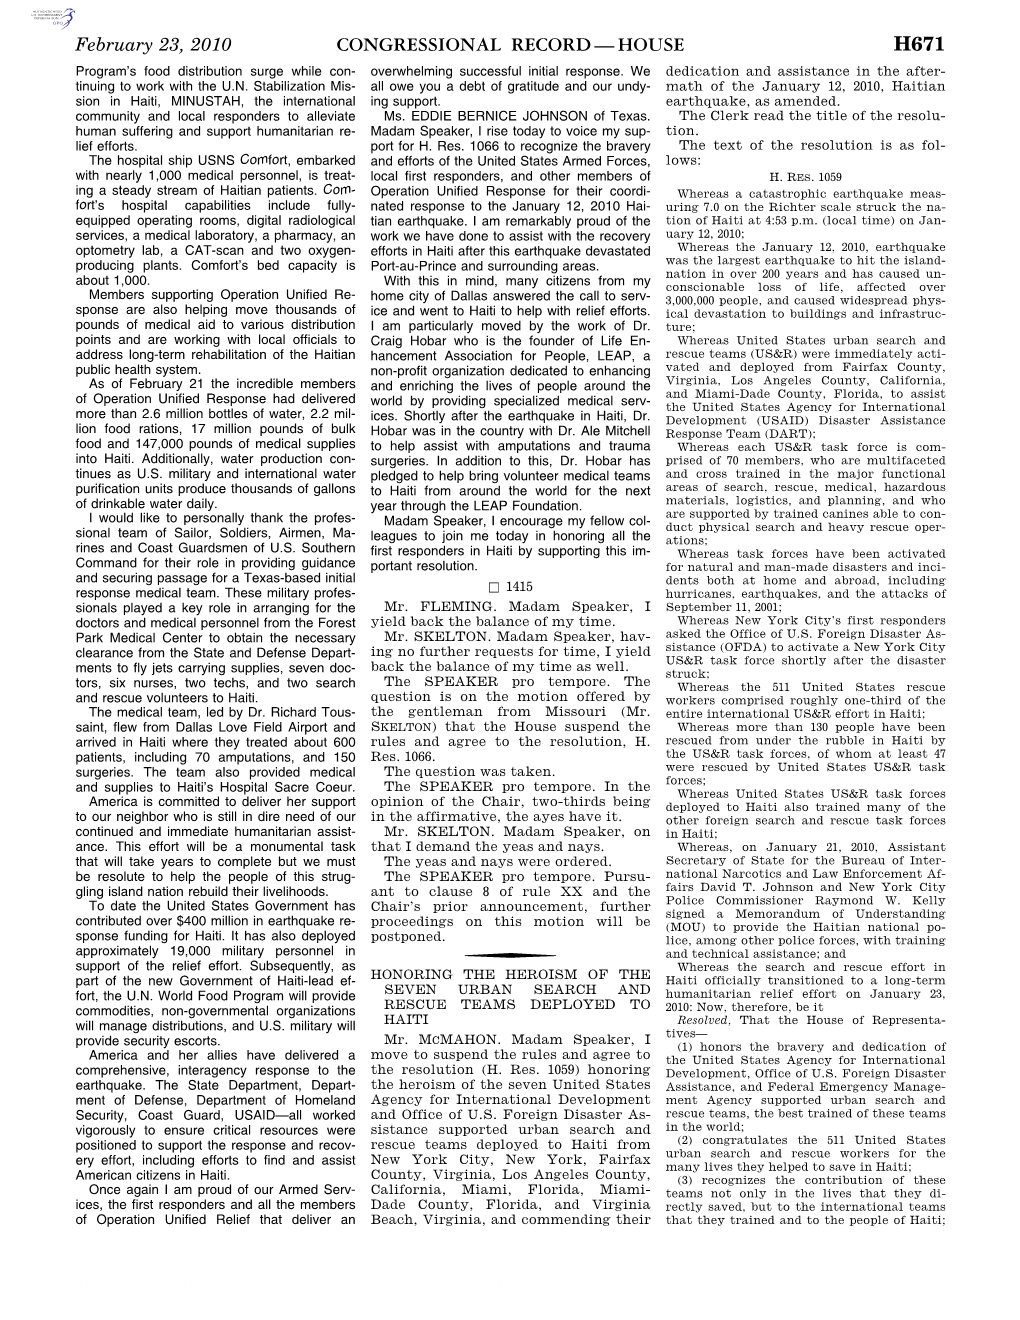 Congressional Record—House H671